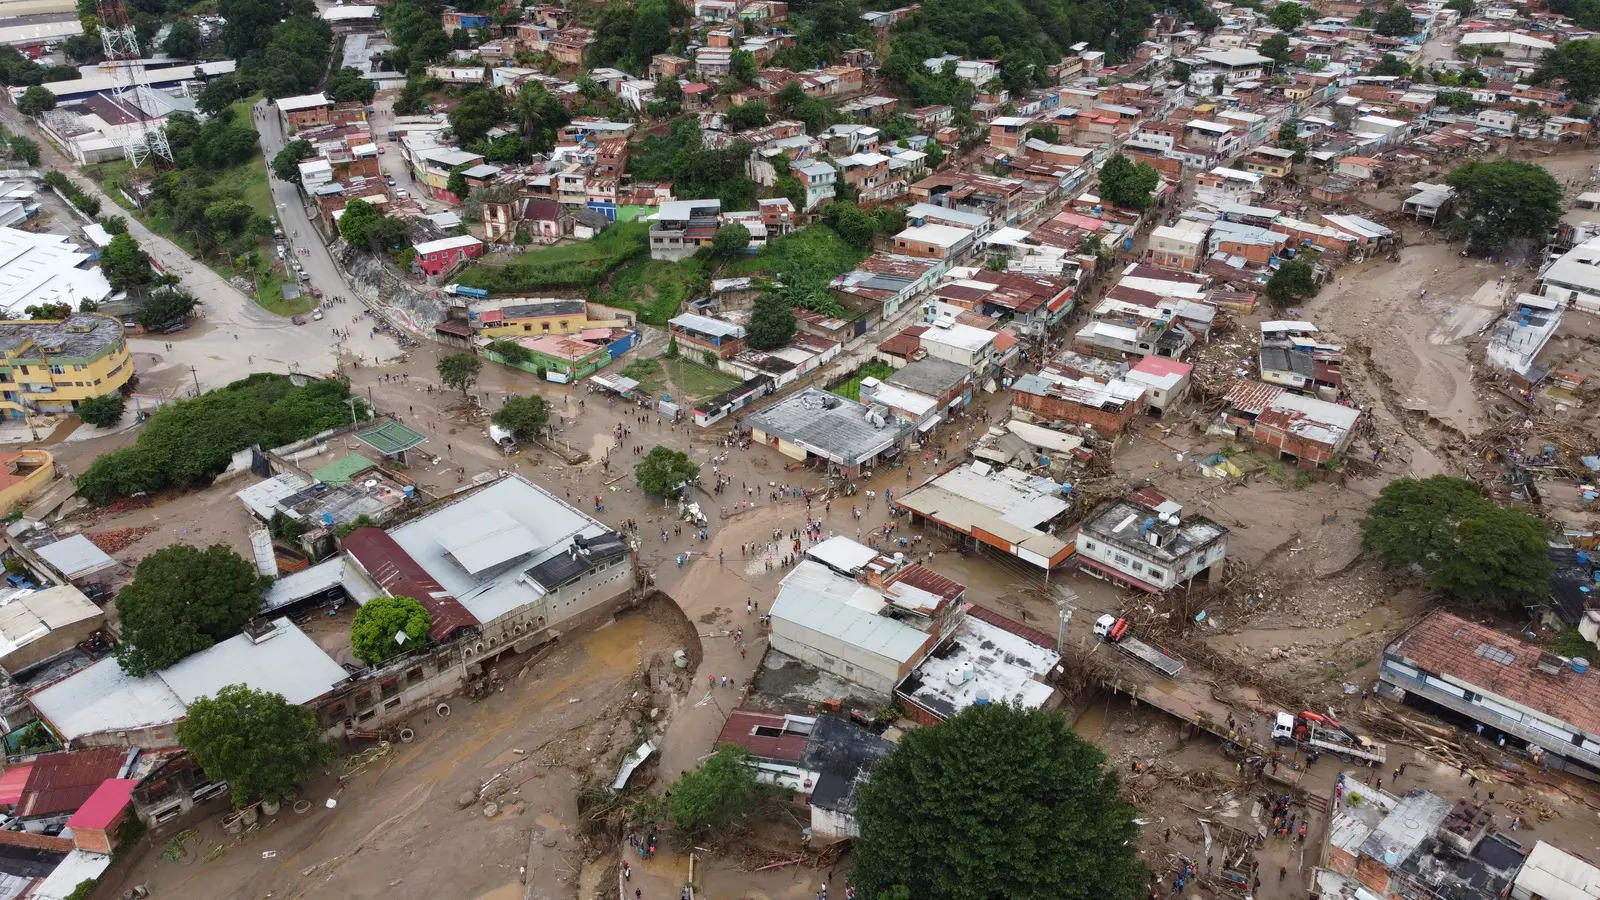 These images capture the agony of flood victims in Venezuela